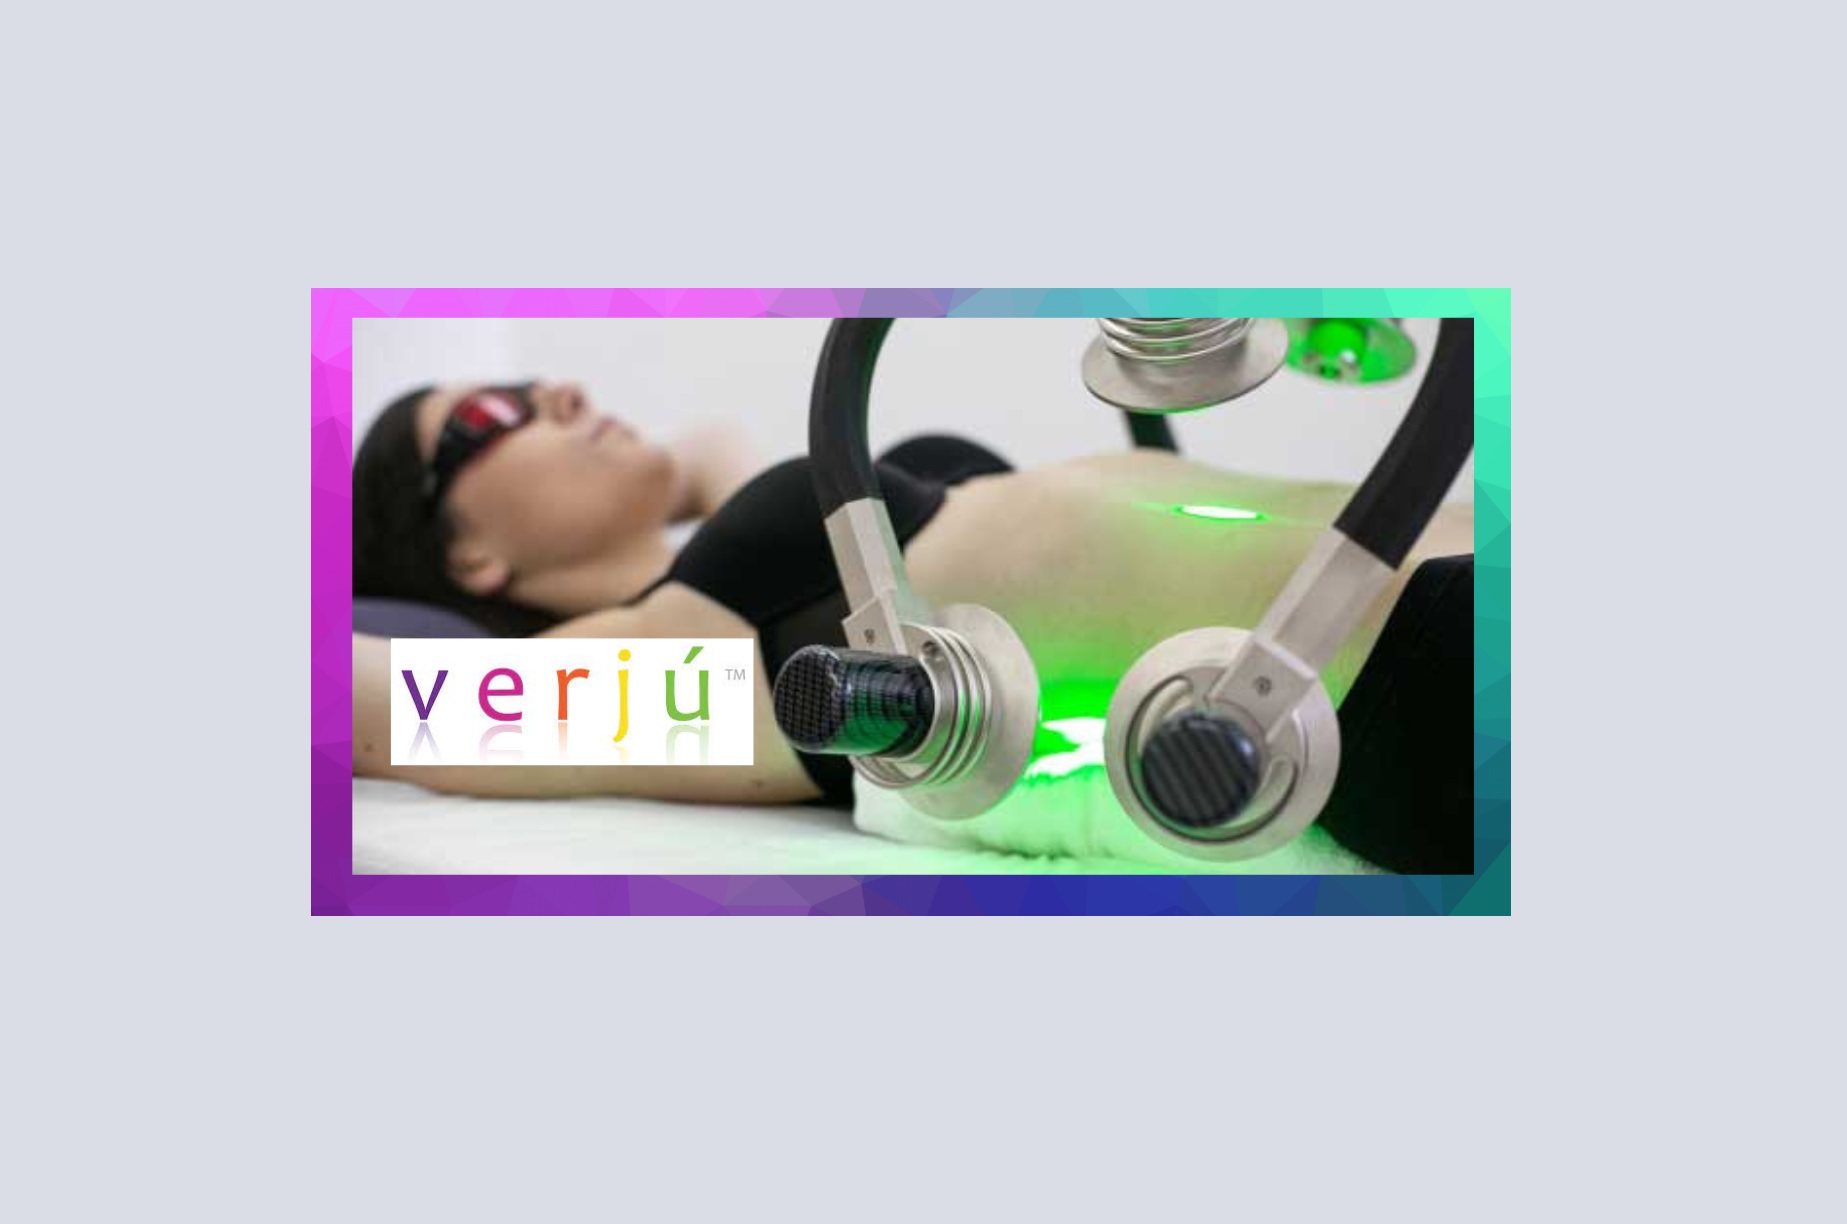 Revolutionary Verjú Laser System: Pain-free, Non-invasive Treatment for Quick Recovery!